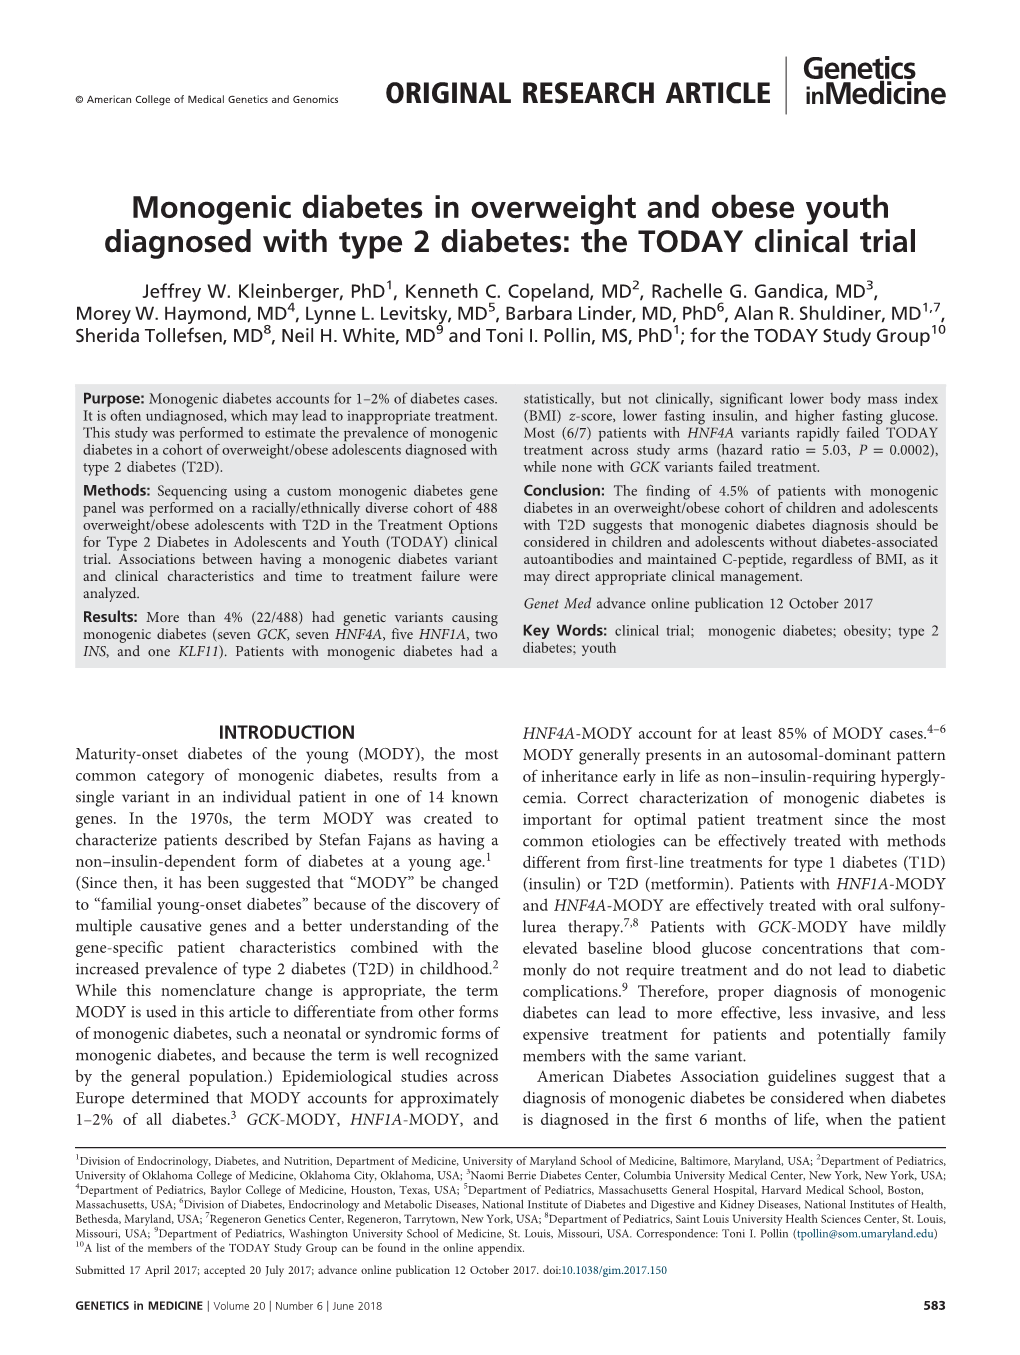 Monogenic Diabetes in Overweight and Obese Youth Diagnosed with Type 2 Diabetes: the TODAY Clinical Trial